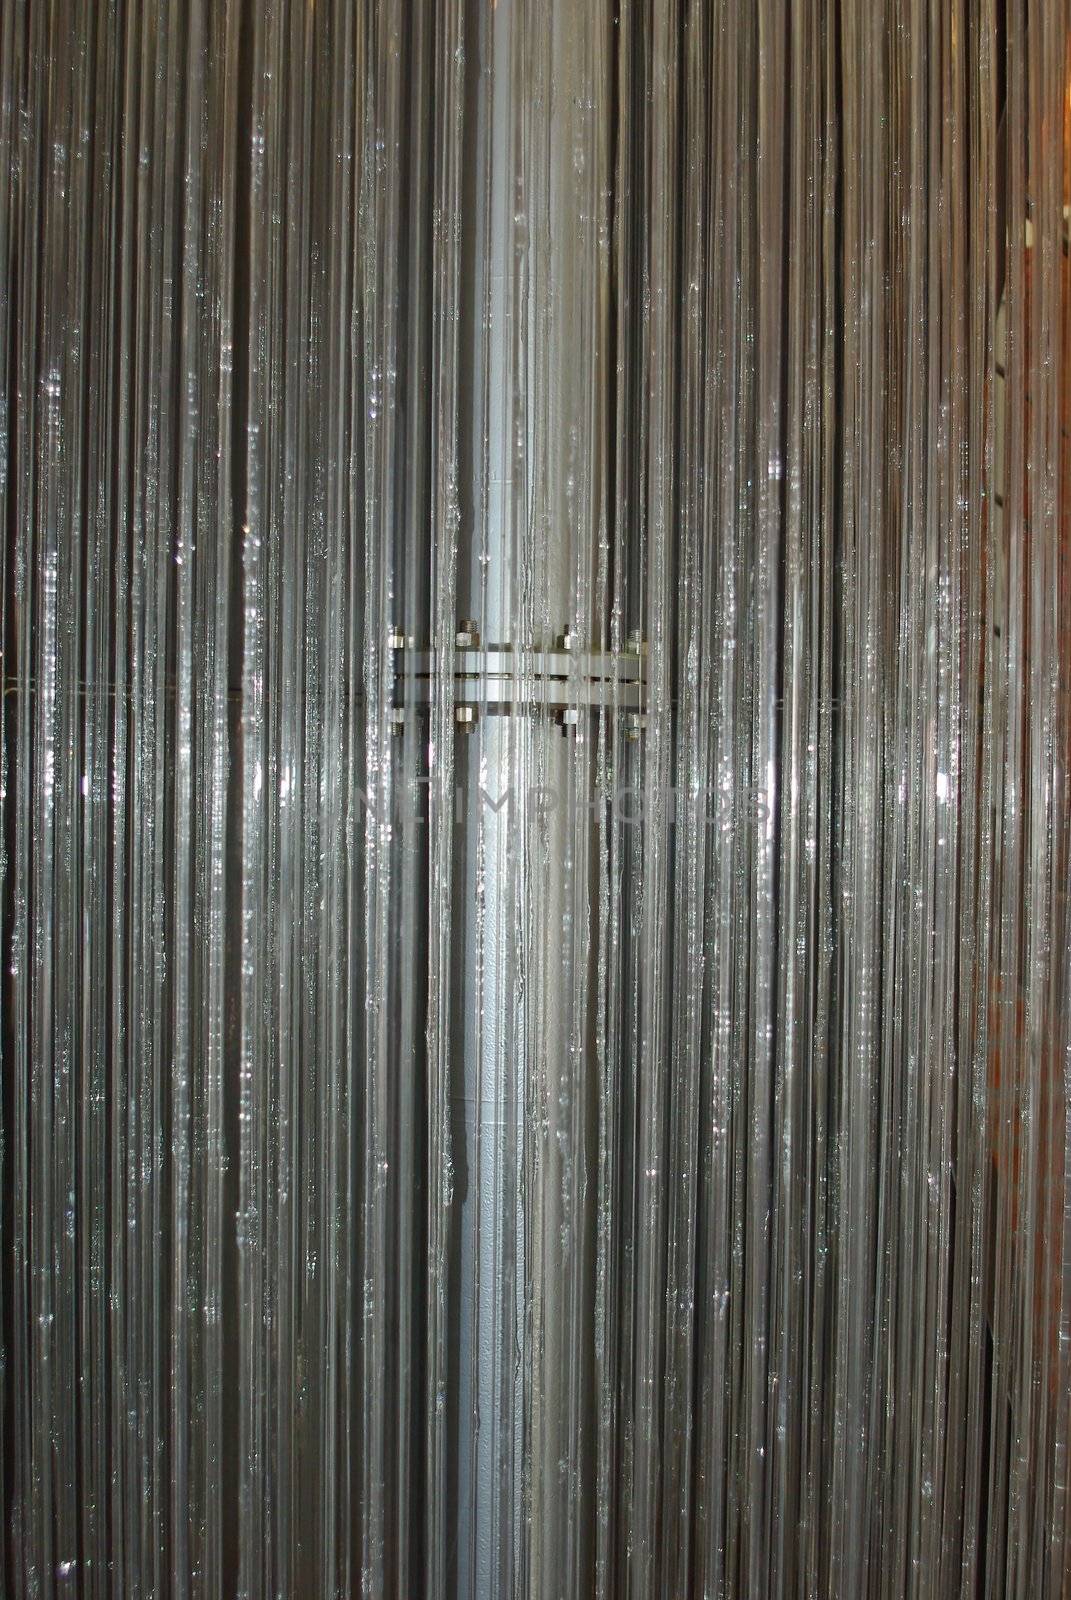 Water flowing down the threads. installation in the museum of sewage.